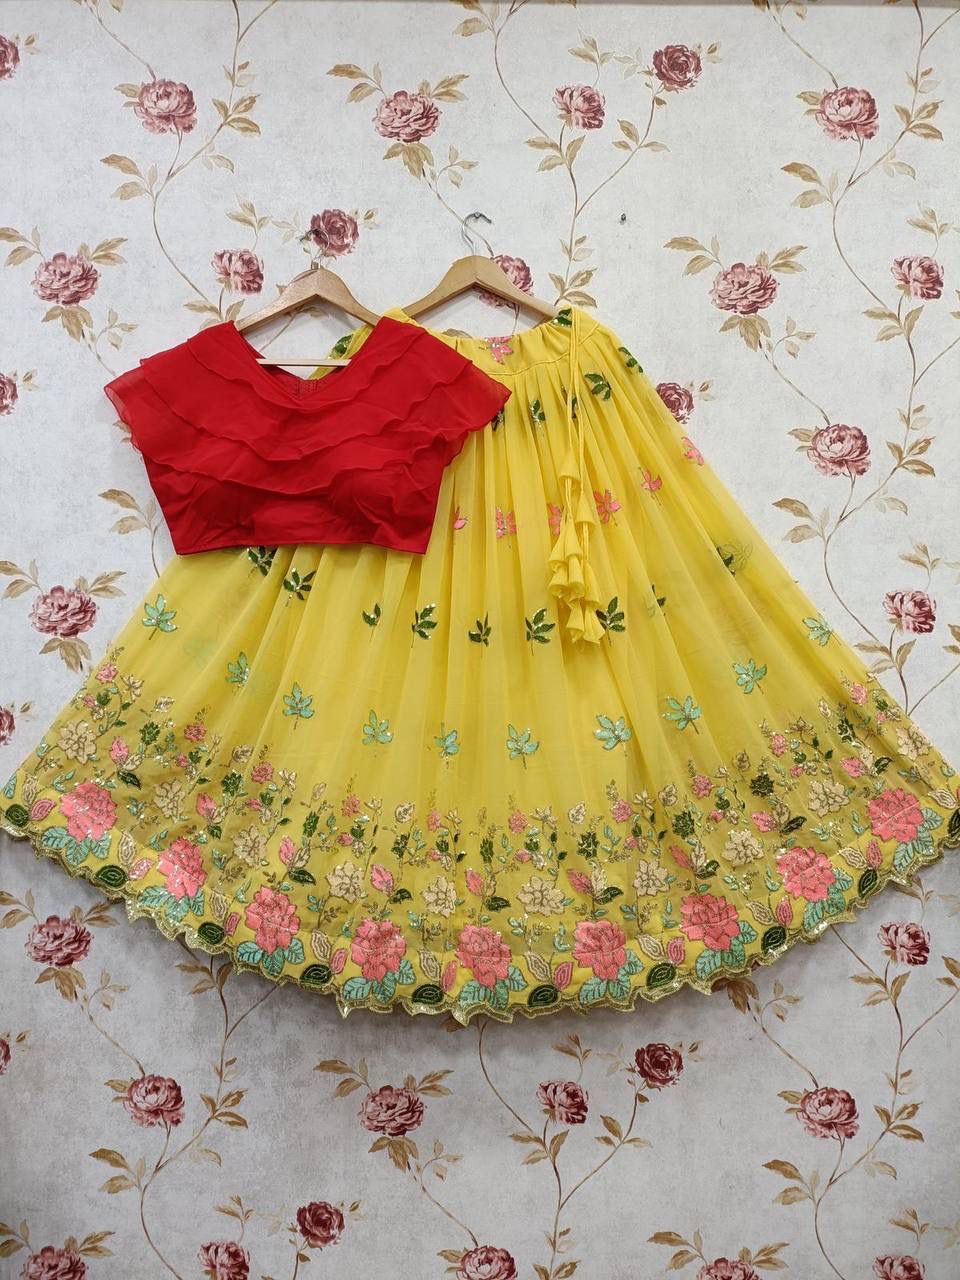 Alka Vol 24 204 To 207 Partywear Frill Designer Kids Lehenga New Collection